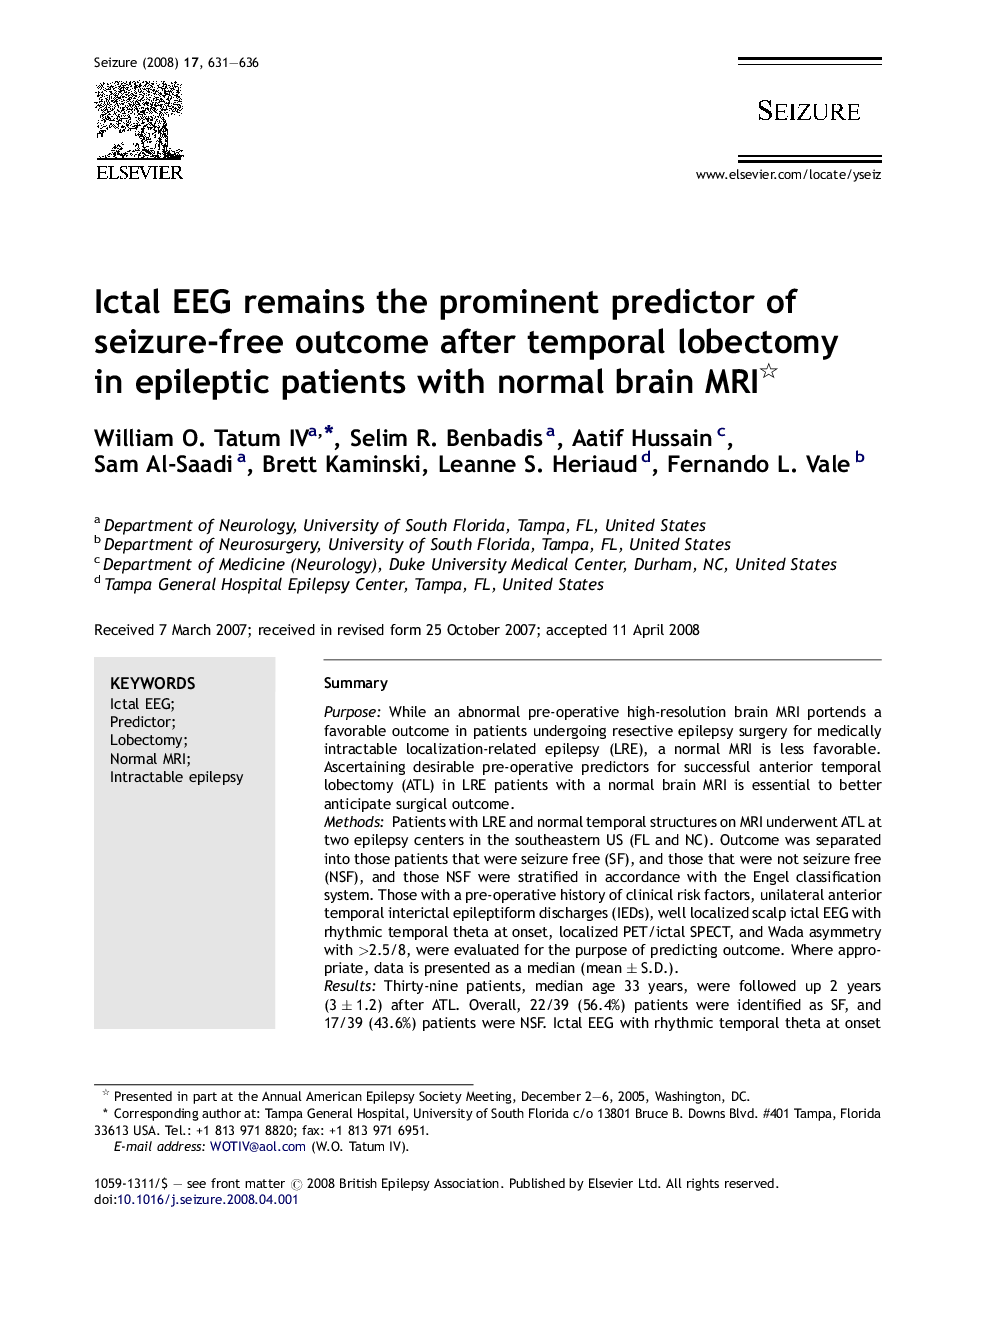 Ictal EEG remains the prominent predictor of seizure-free outcome after temporal lobectomy in epileptic patients with normal brain MRI 